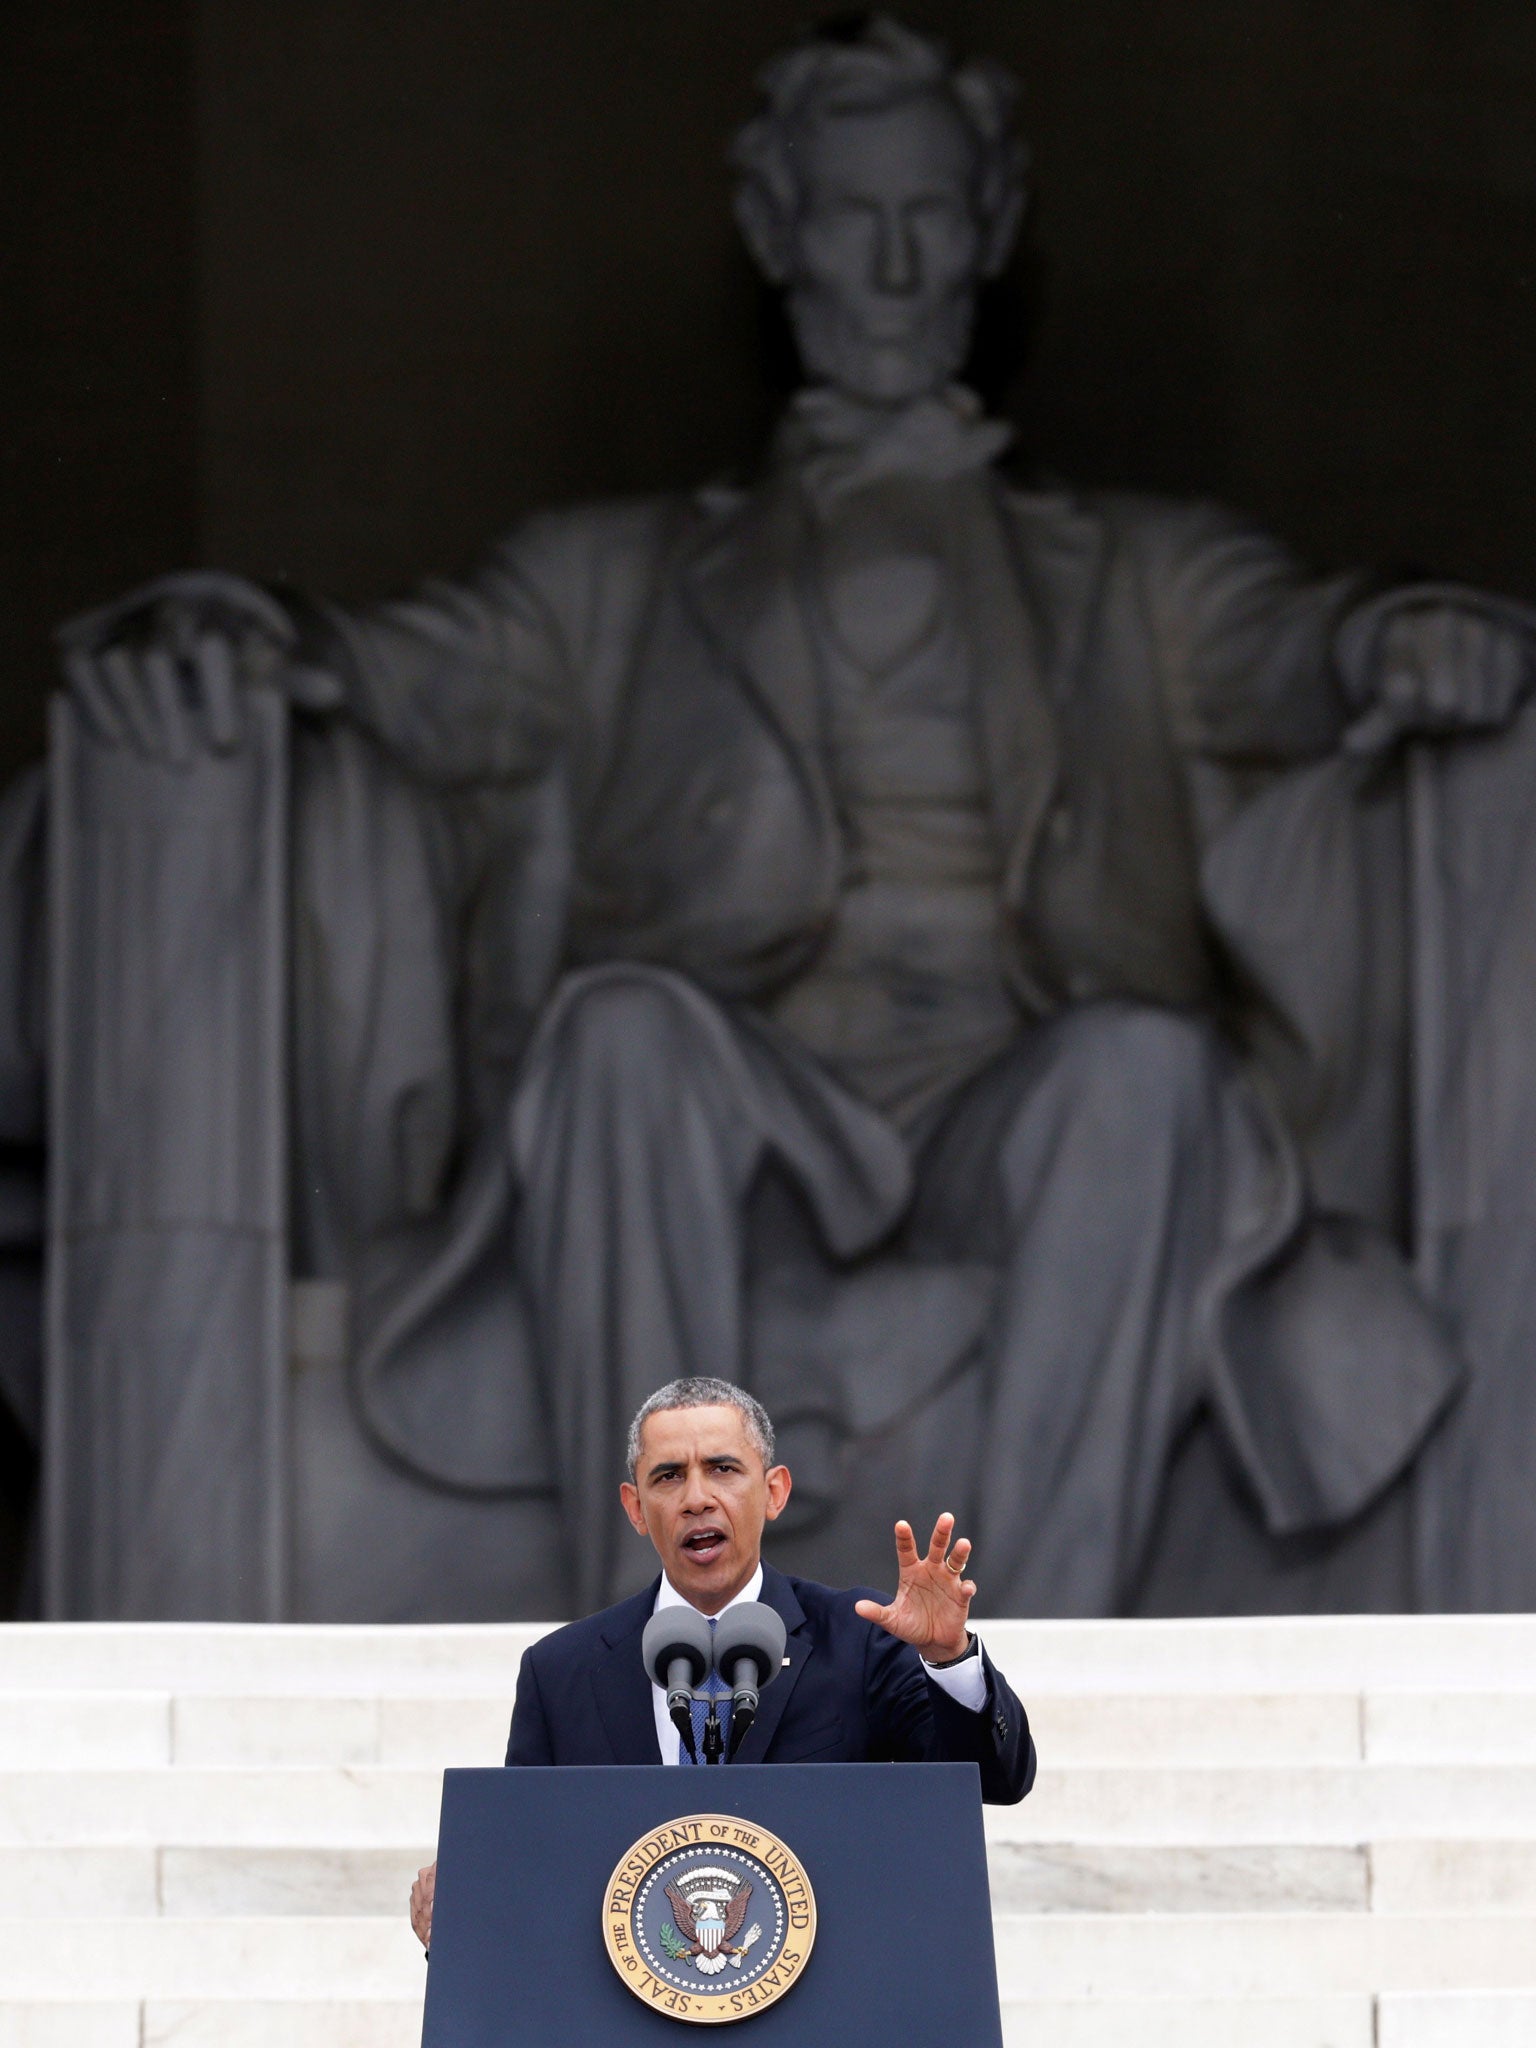 Barack Obama speaks during the Let Freedom Ring ceremony on the steps of the Lincoln Memorial